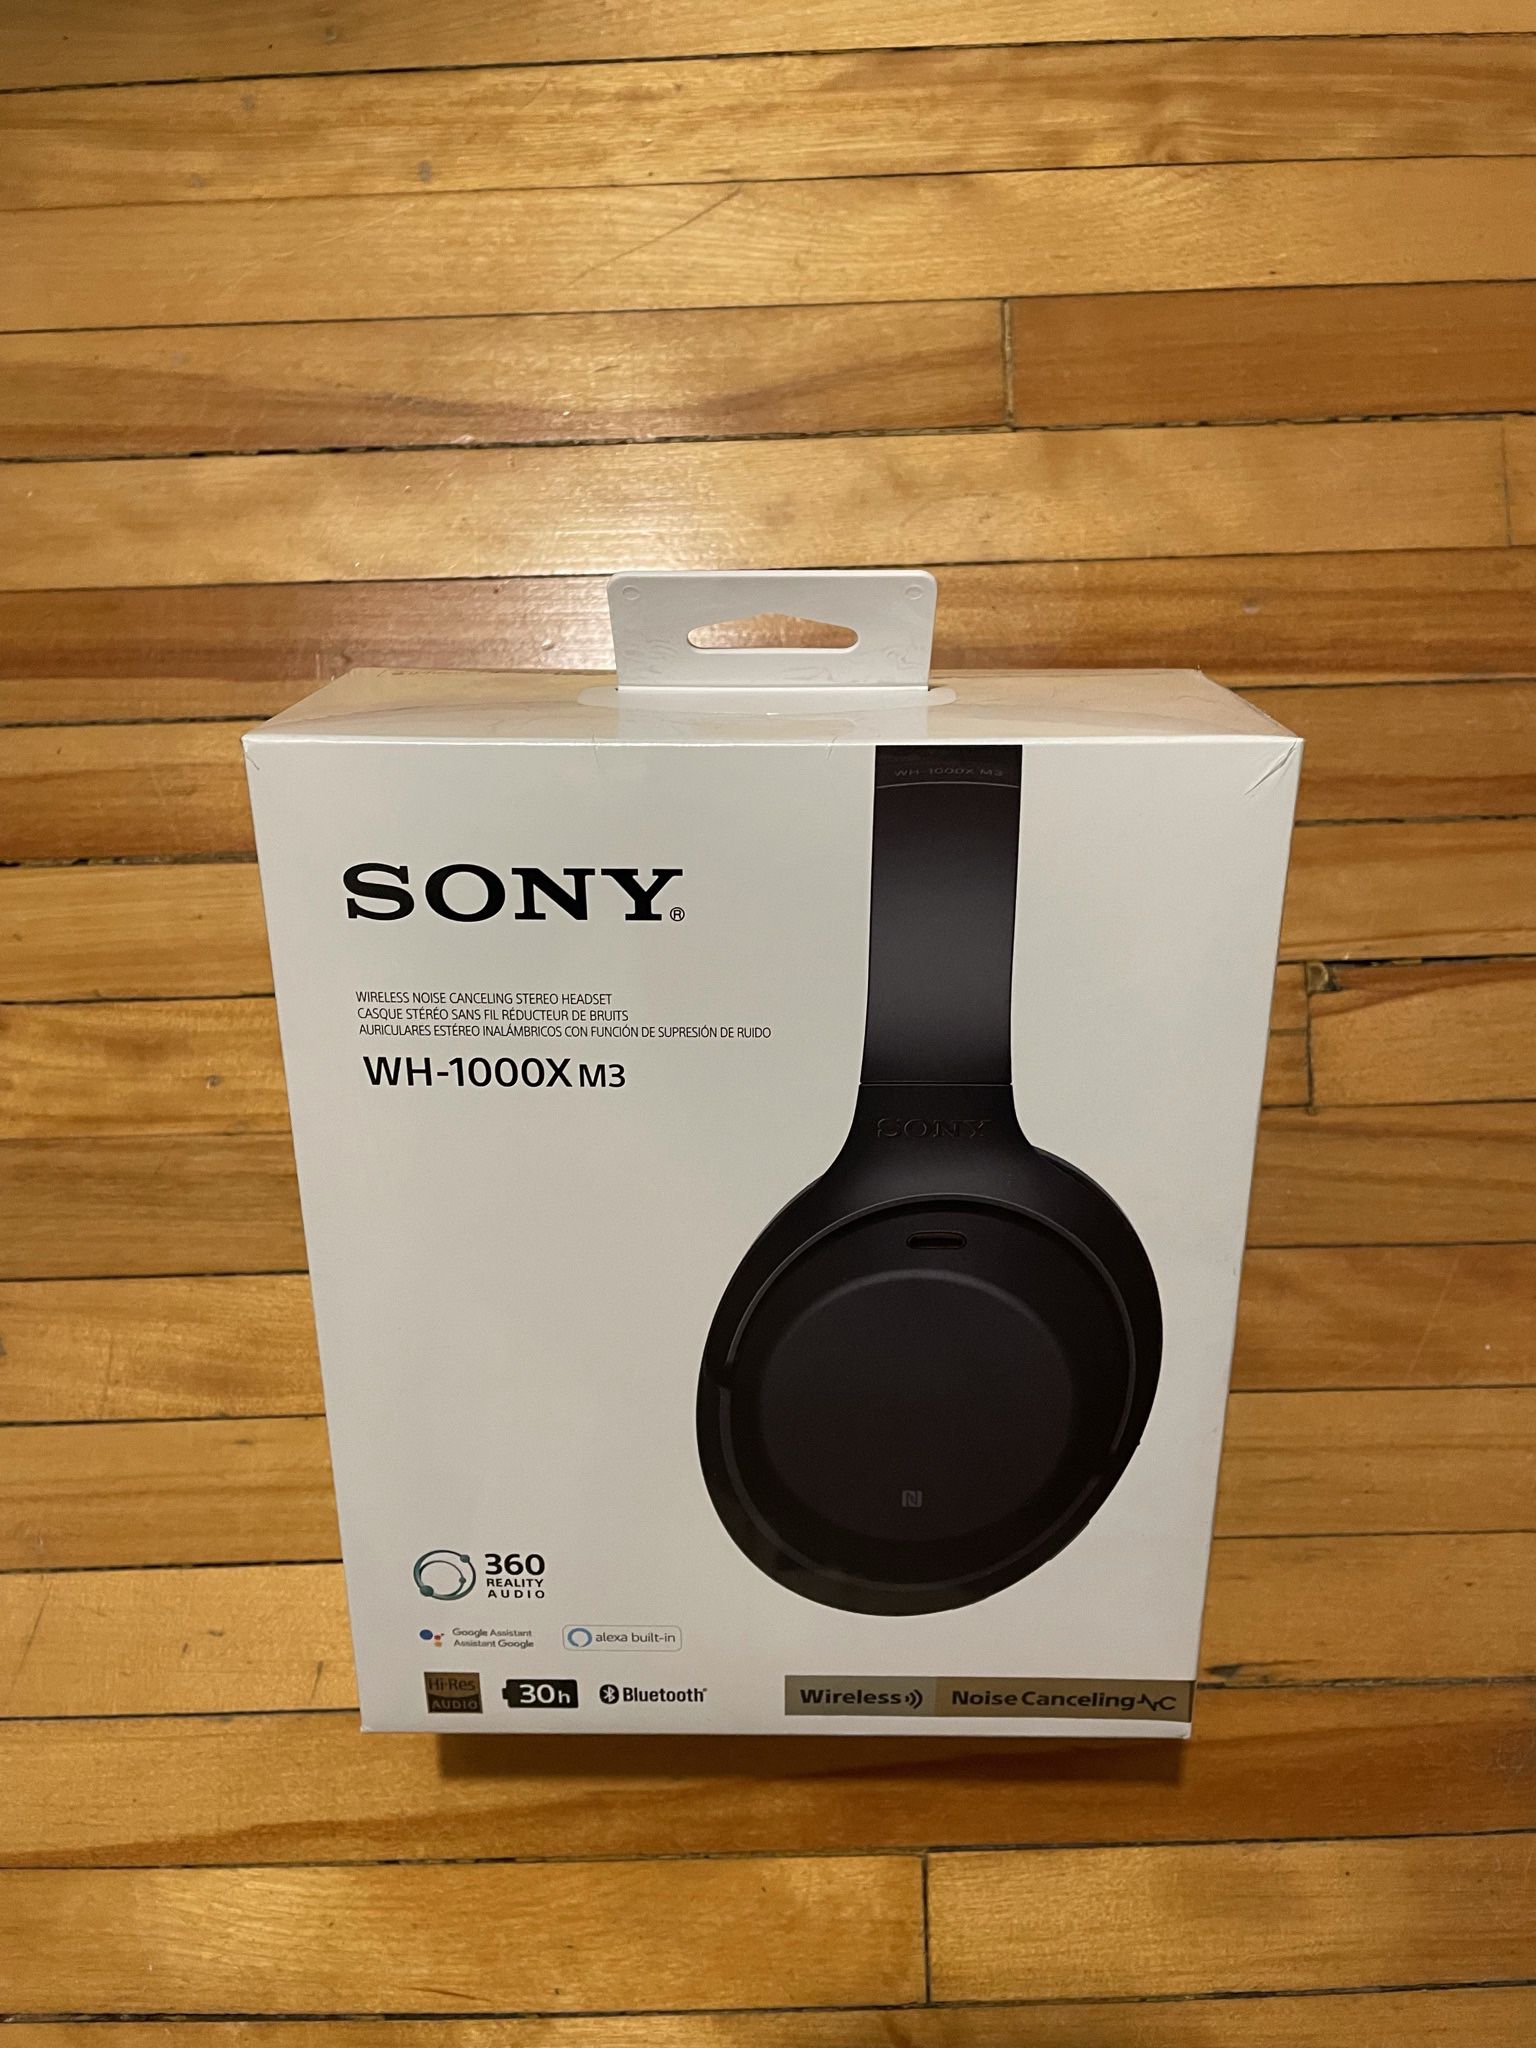 Sony WH-1000XM3 (new) wireless noise-cancelling over-ear headphones (black)